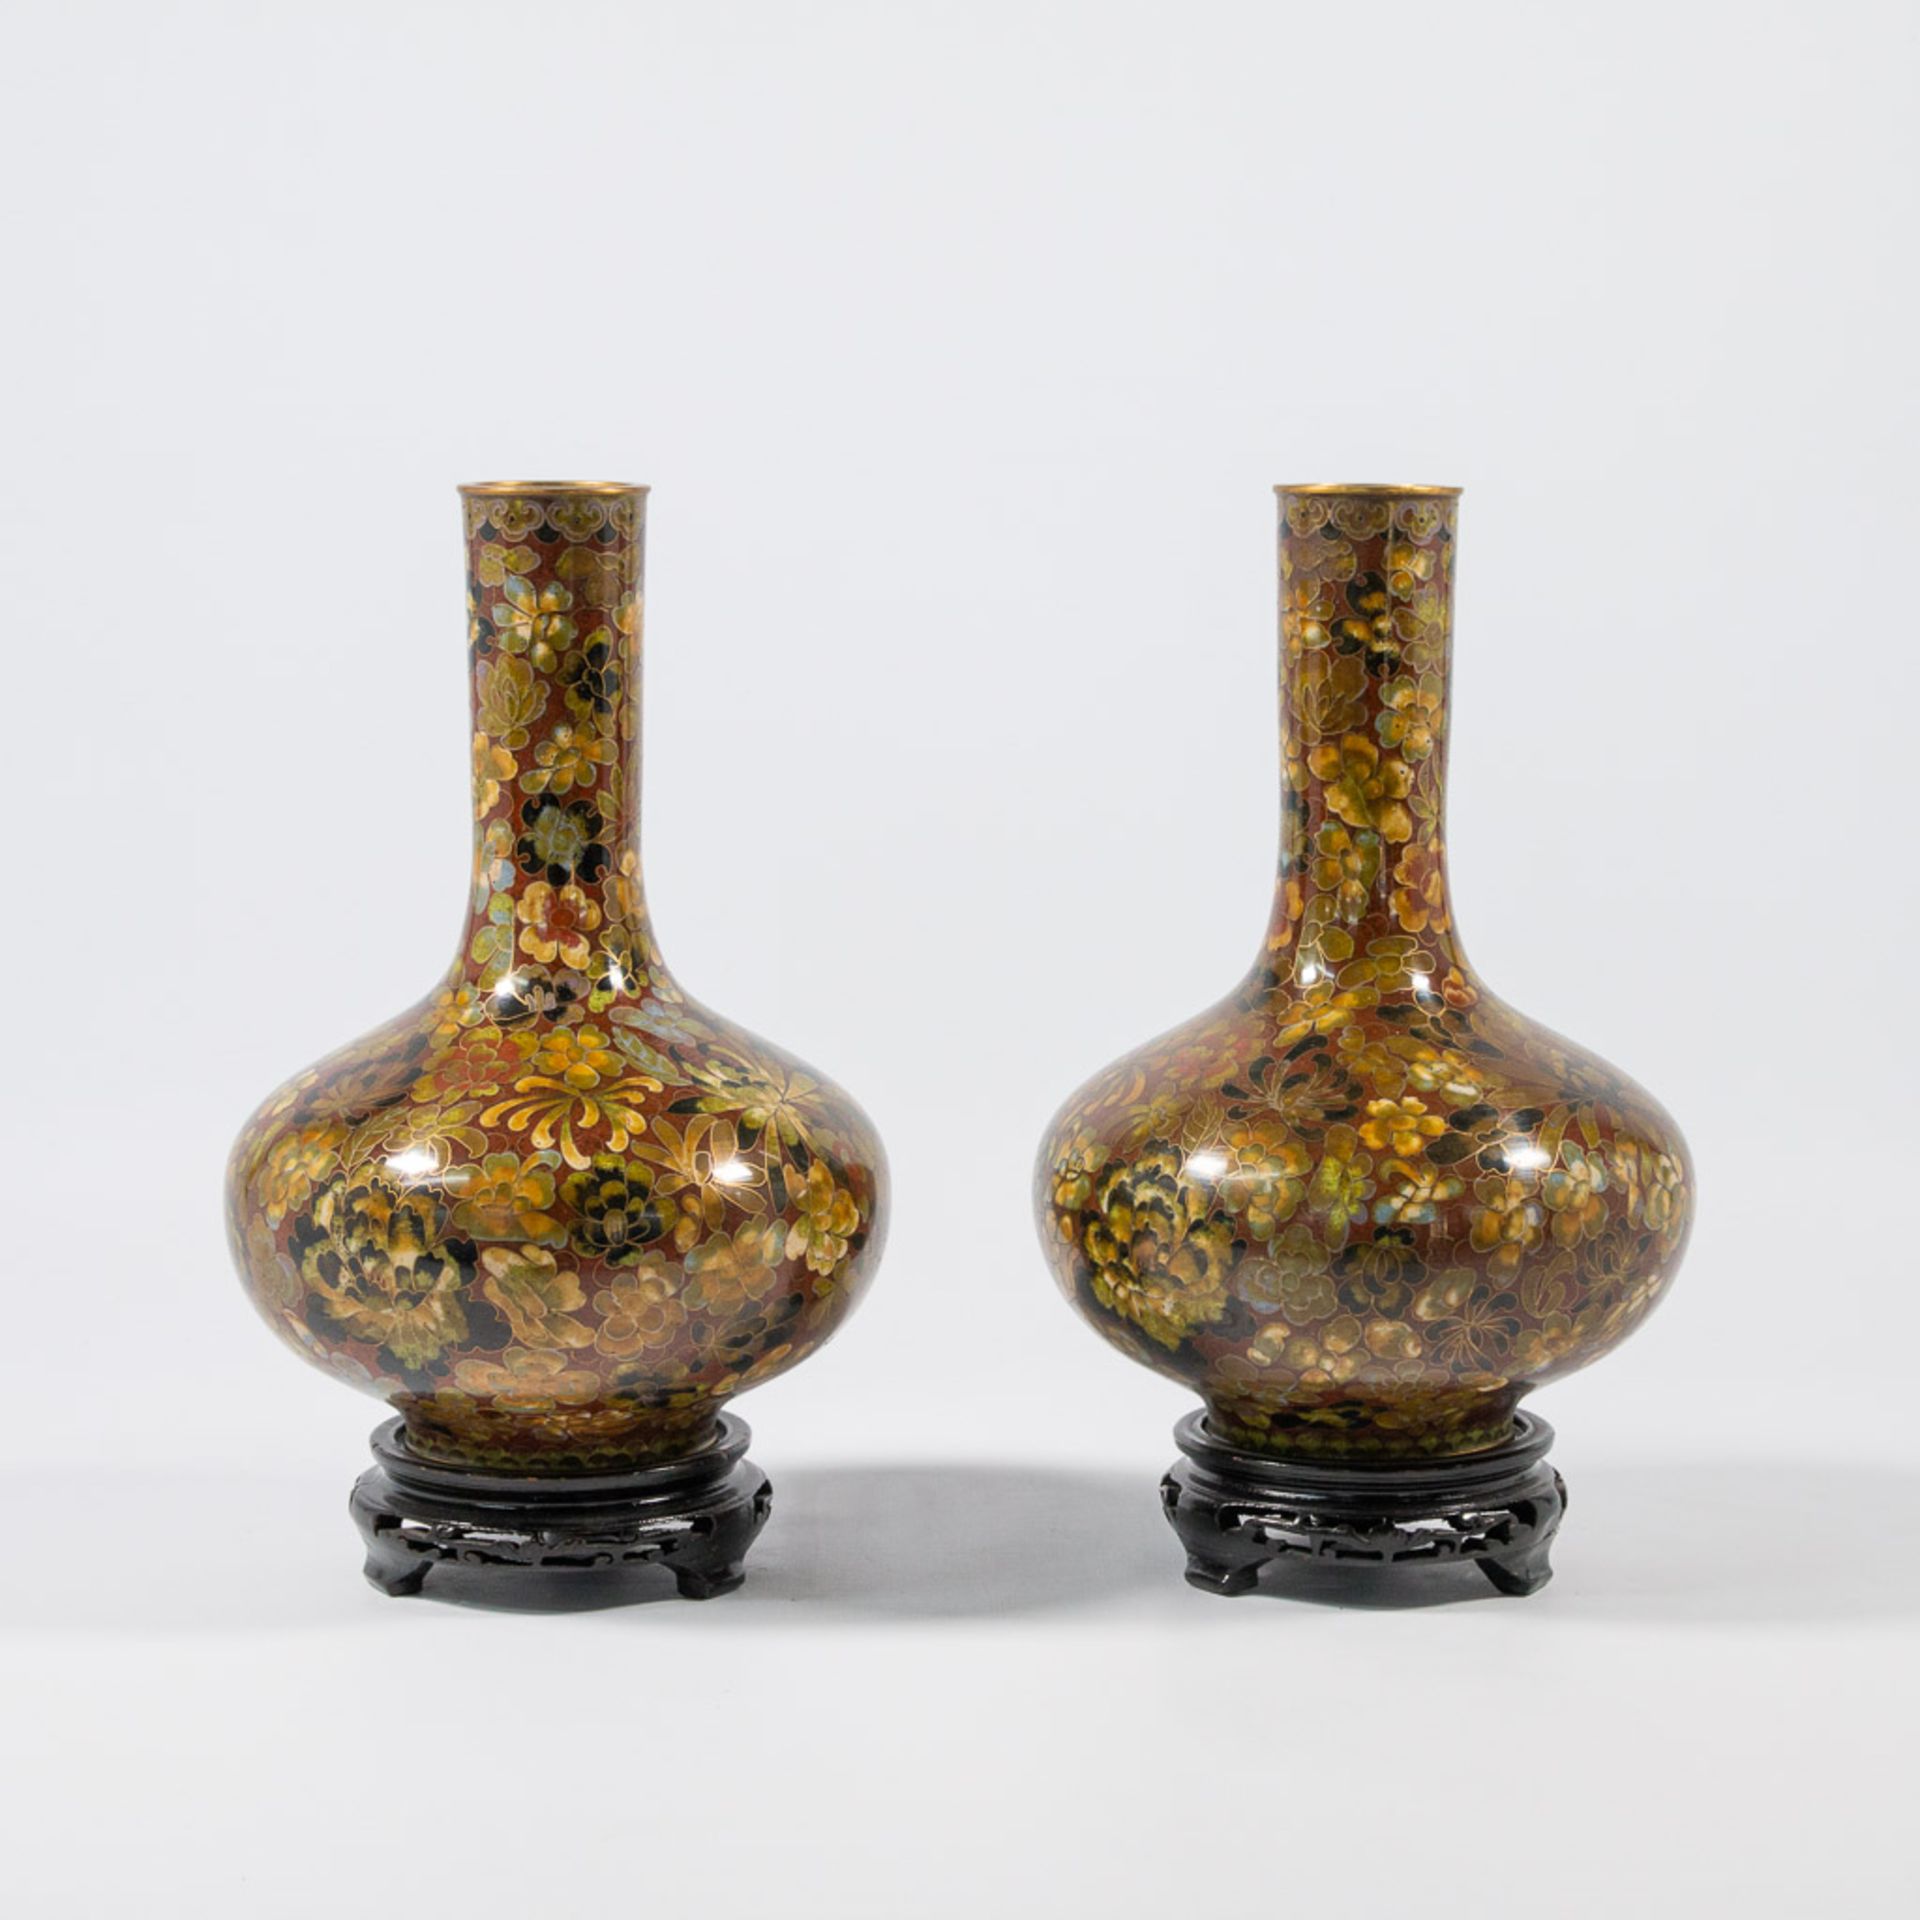 A pair of cloisonné vases - Image 4 of 12